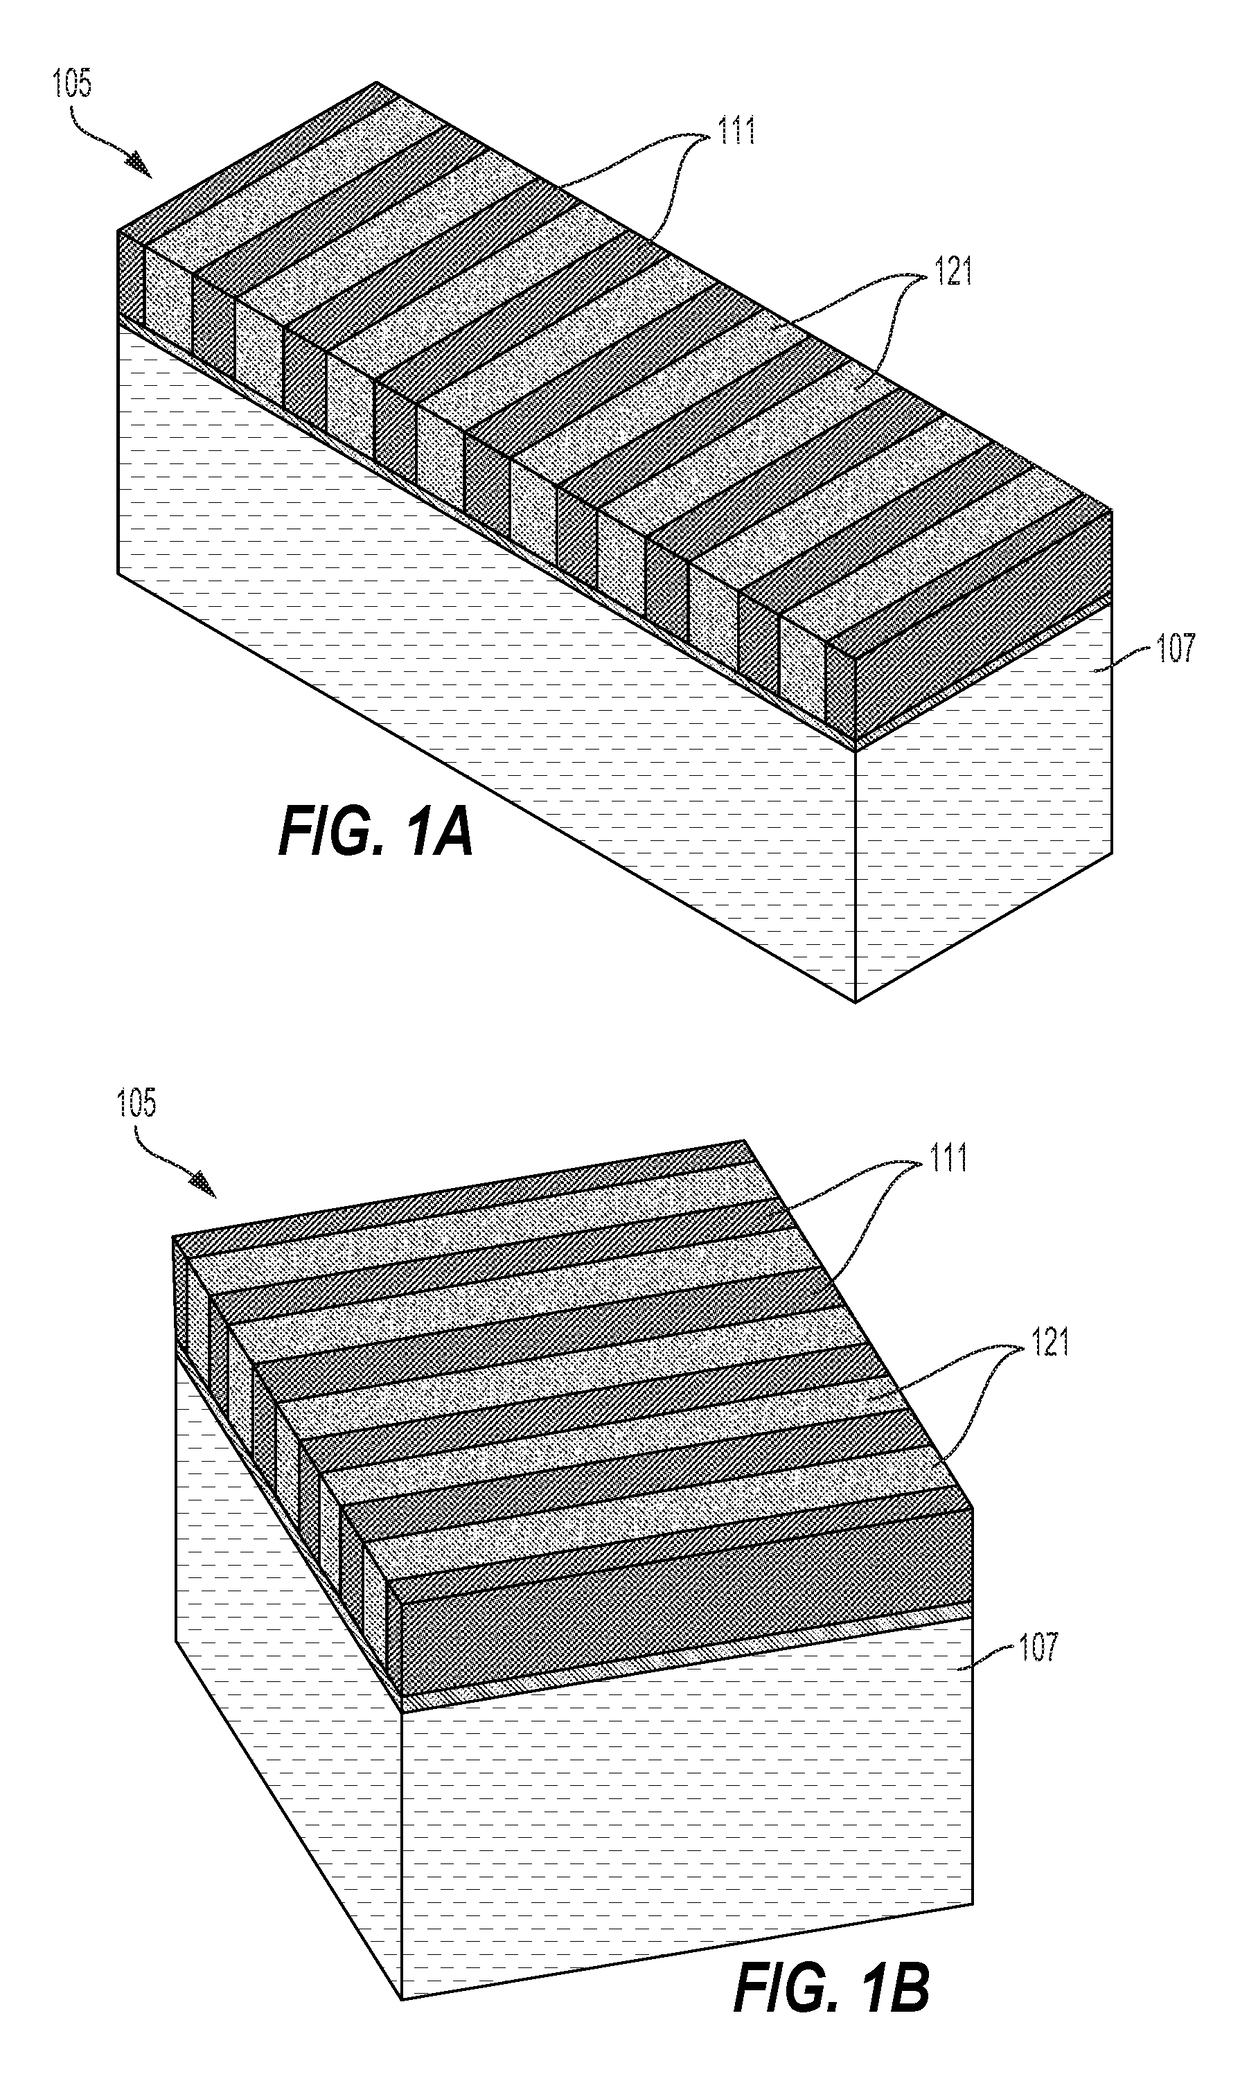 Self-alignment of metal and via using selective deposition